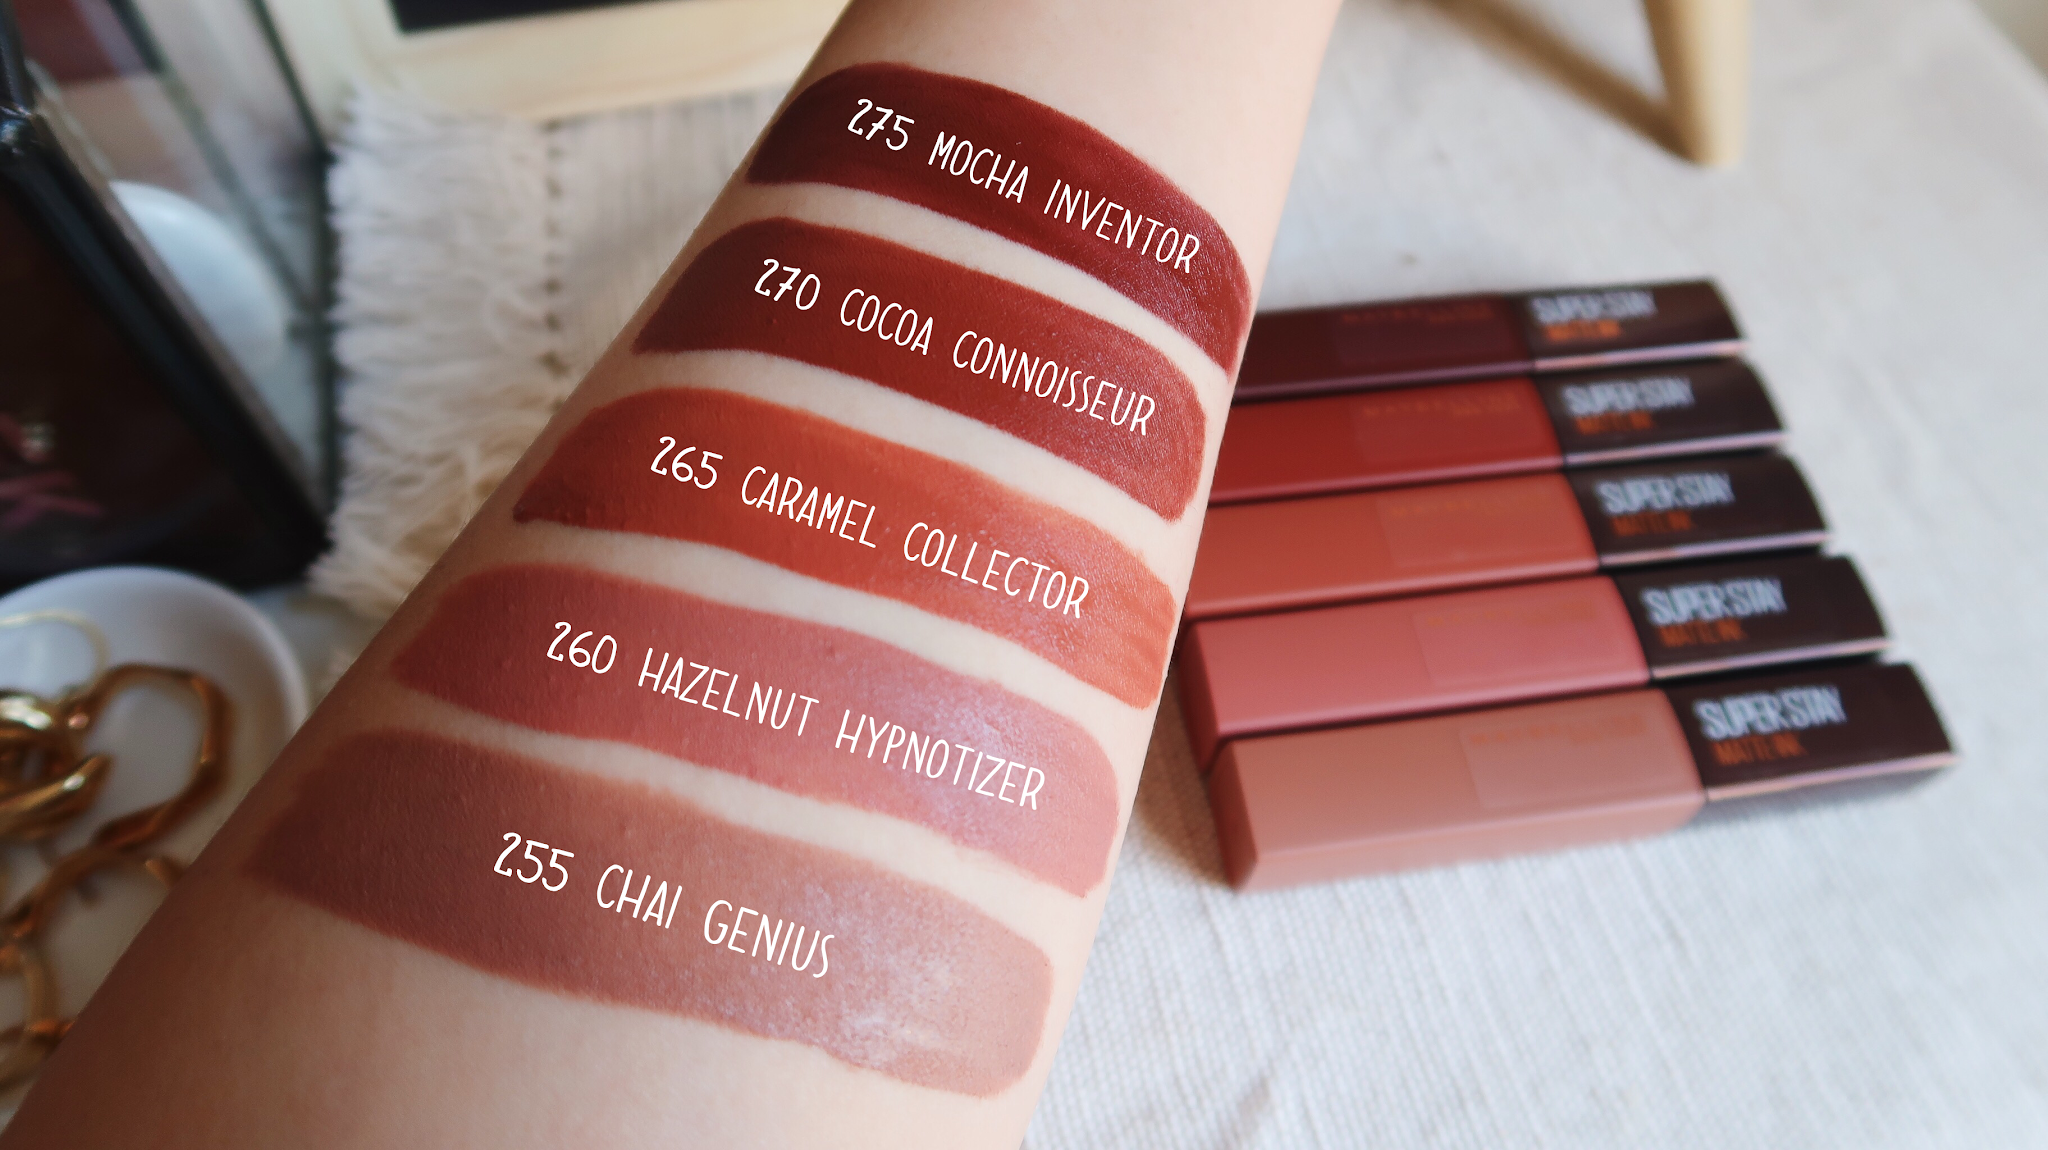 Maybelline Superstay Matte Ink Liquid Lipstick Coffee Edition Review